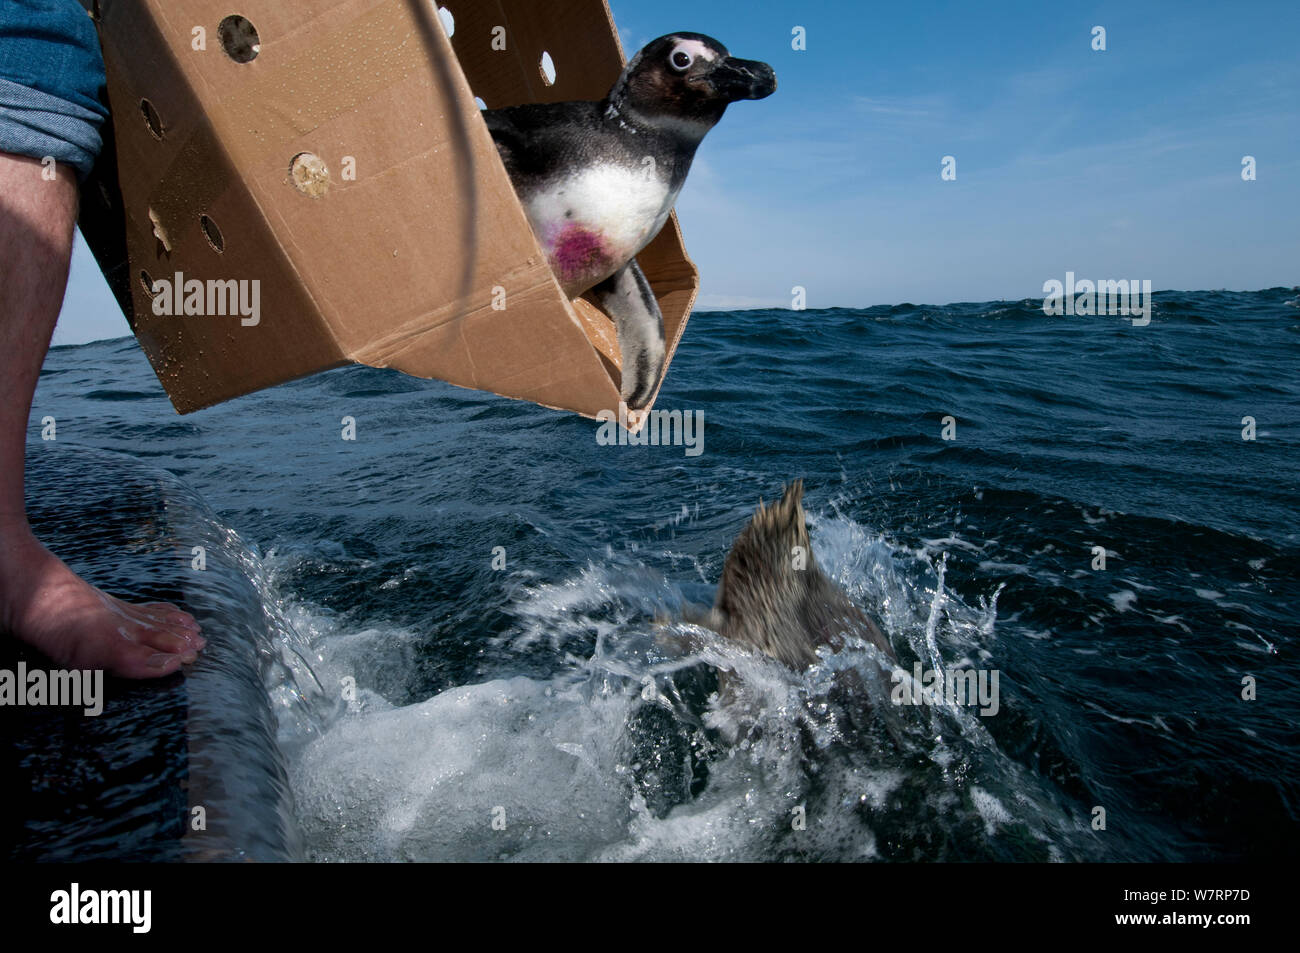 African penguin, (Spheniscus demersus) being released after rehabilitation at Southern African Foundation for the Conservation of Coastal Birds (SANCCOB). Release site near to Robben Island in Table Bay. Cape Town, South Africa. August 2011 Stock Photo